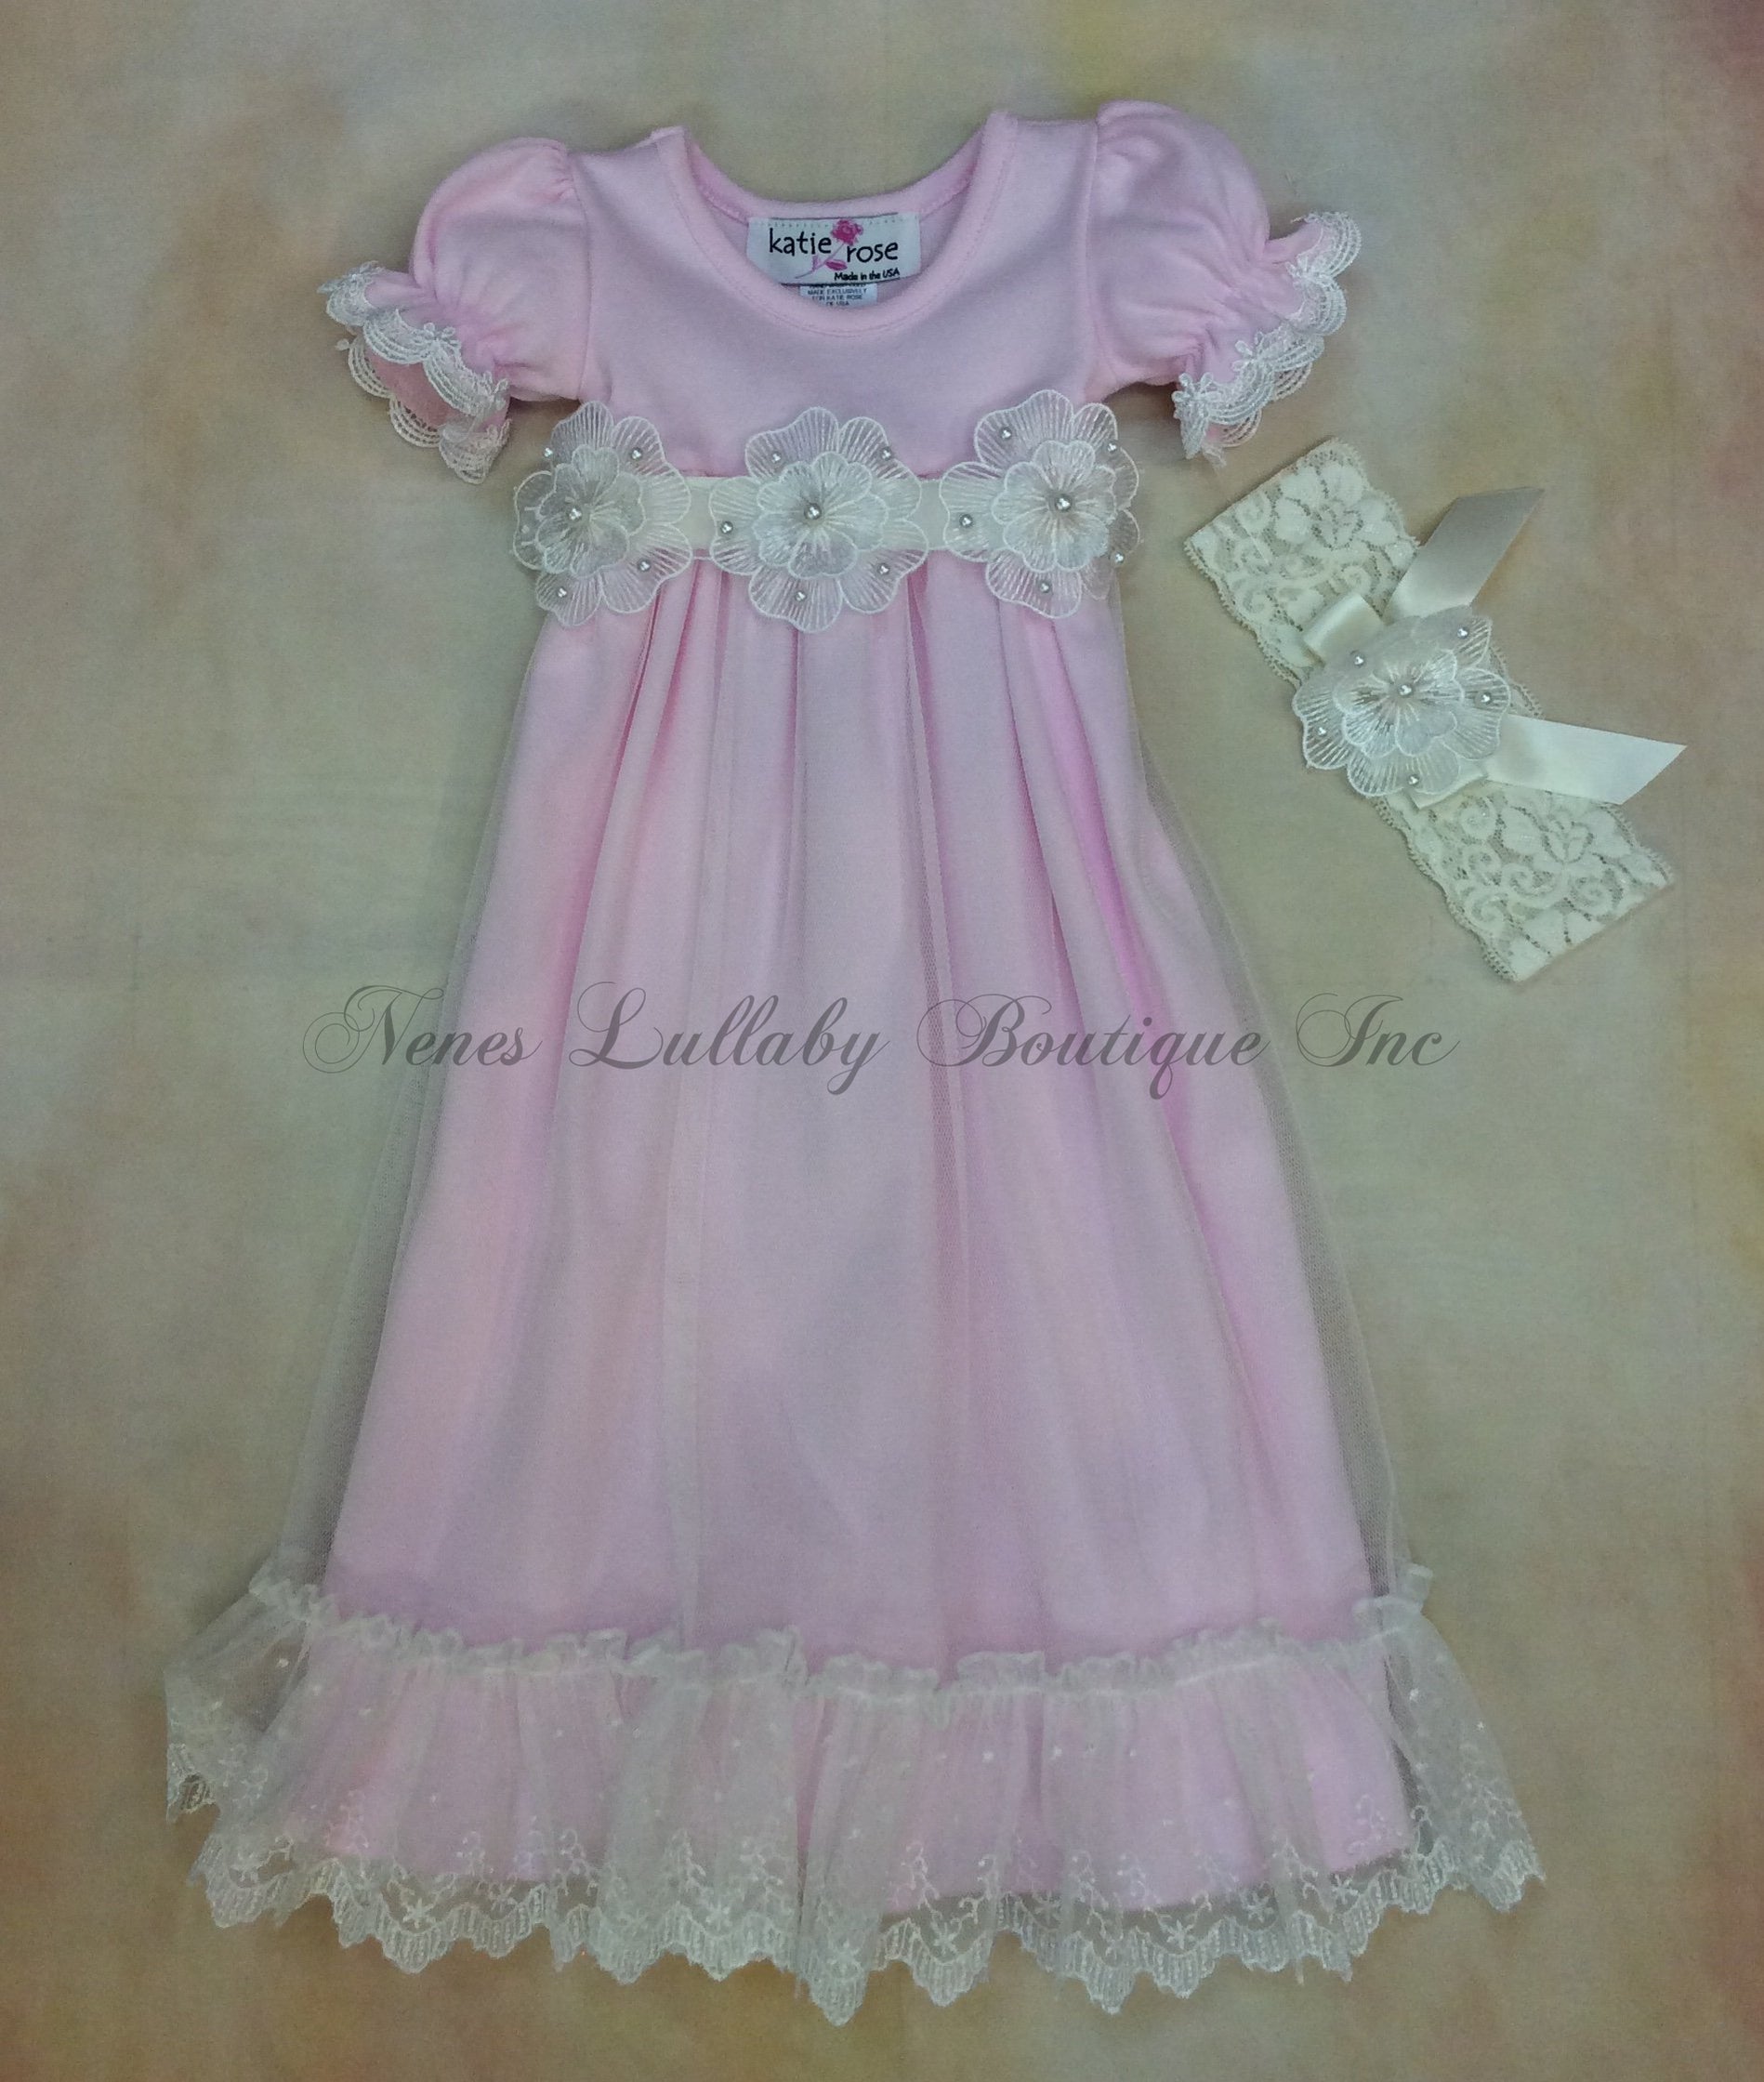 Katie Rose Piper Day Gown-Katie Rose-Nenes Lullaby Boutique Inc